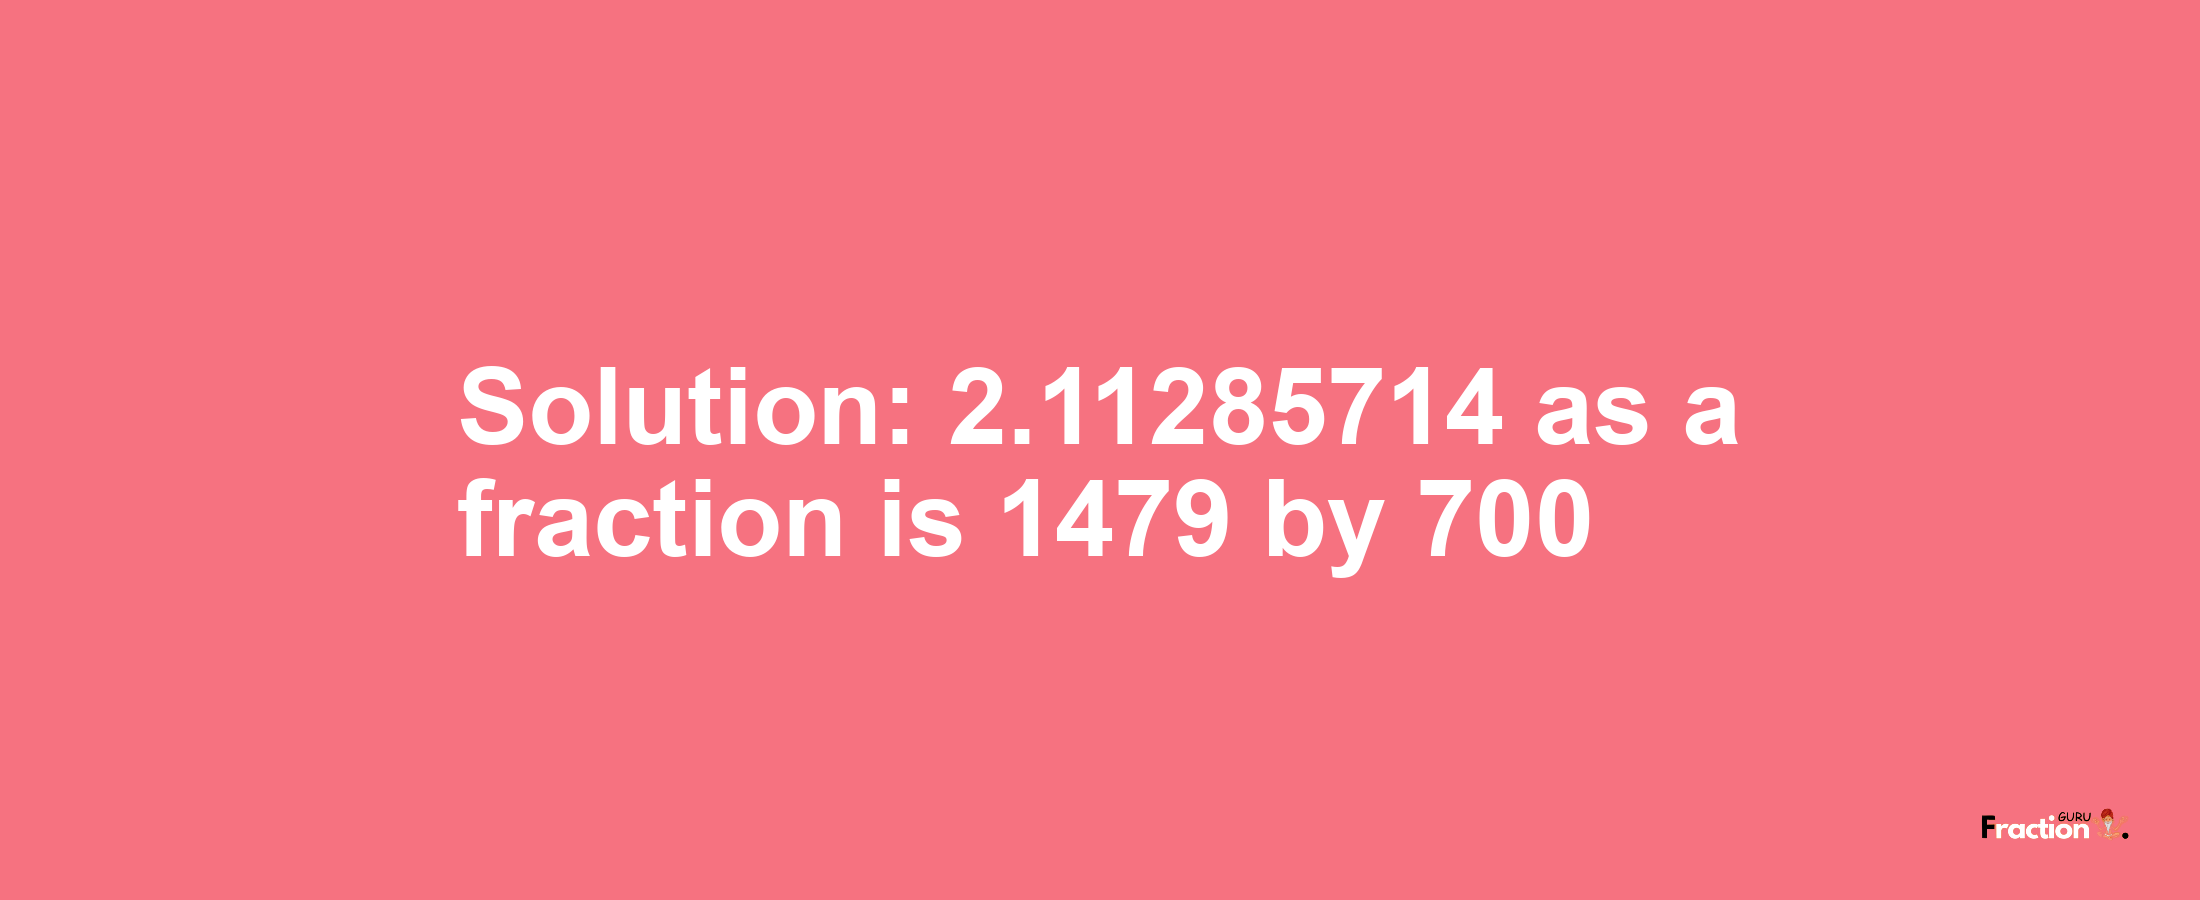 Solution:2.11285714 as a fraction is 1479/700